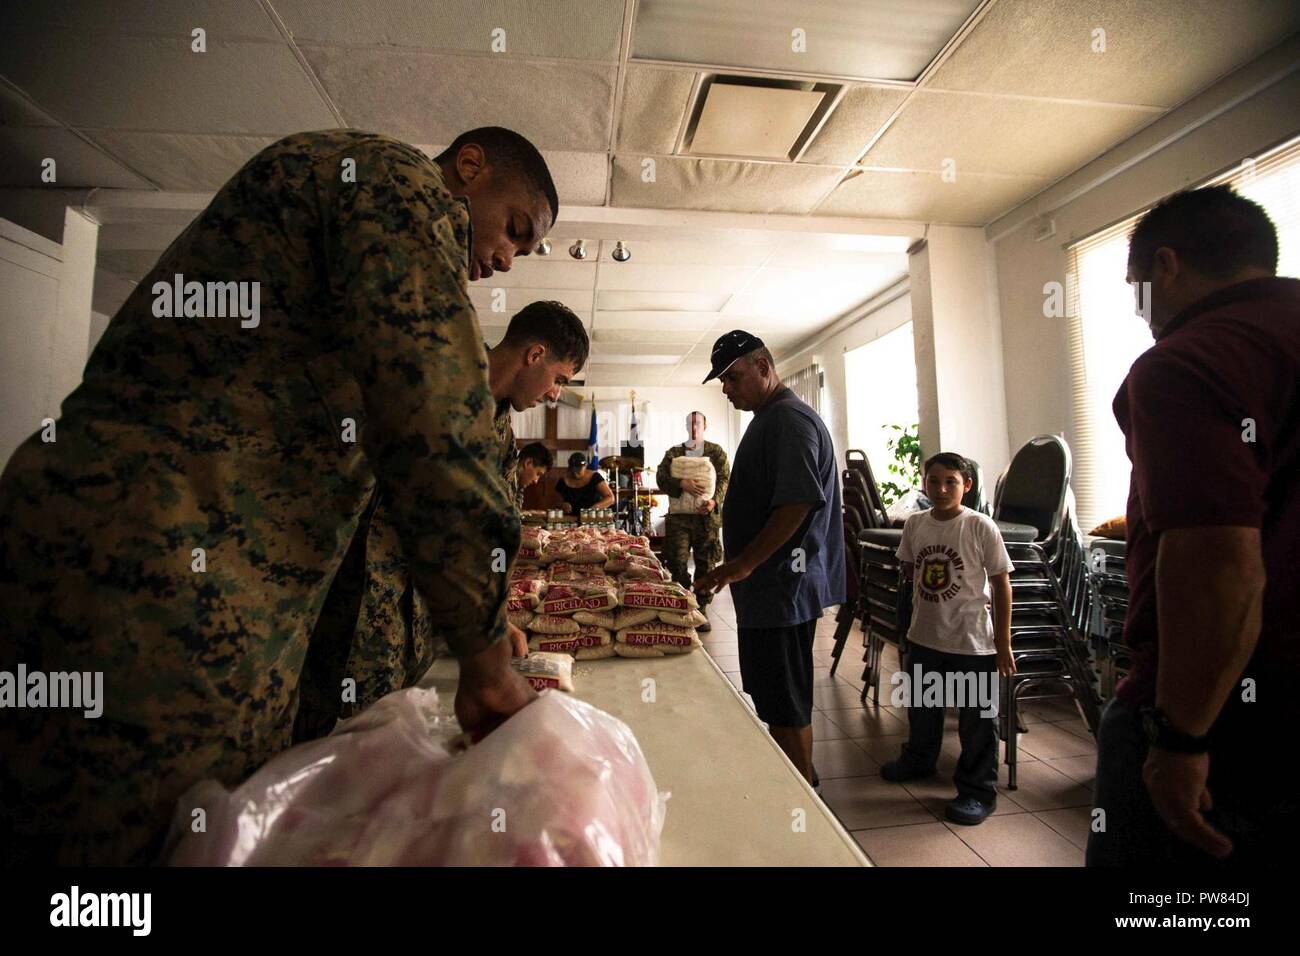 U.S. Marine Corps Lance Cpl. Rael G. Pascall, left, an embark specialist with the 26th Marine Expeditionary Unit (MEU), helps stock food for the community at a local Salvation Army as part of relief efforts for victims of Hurricane Maria in Fajardo, Puerto Rico, Oct. 3, 2017. The 26th MEU, along with local authorities and other Department of Defense services, is supporting the lead federal agency, Federal Emergency Management Agency, in providing humanitarian aid efforts for Puerto Rico. Stock Photo